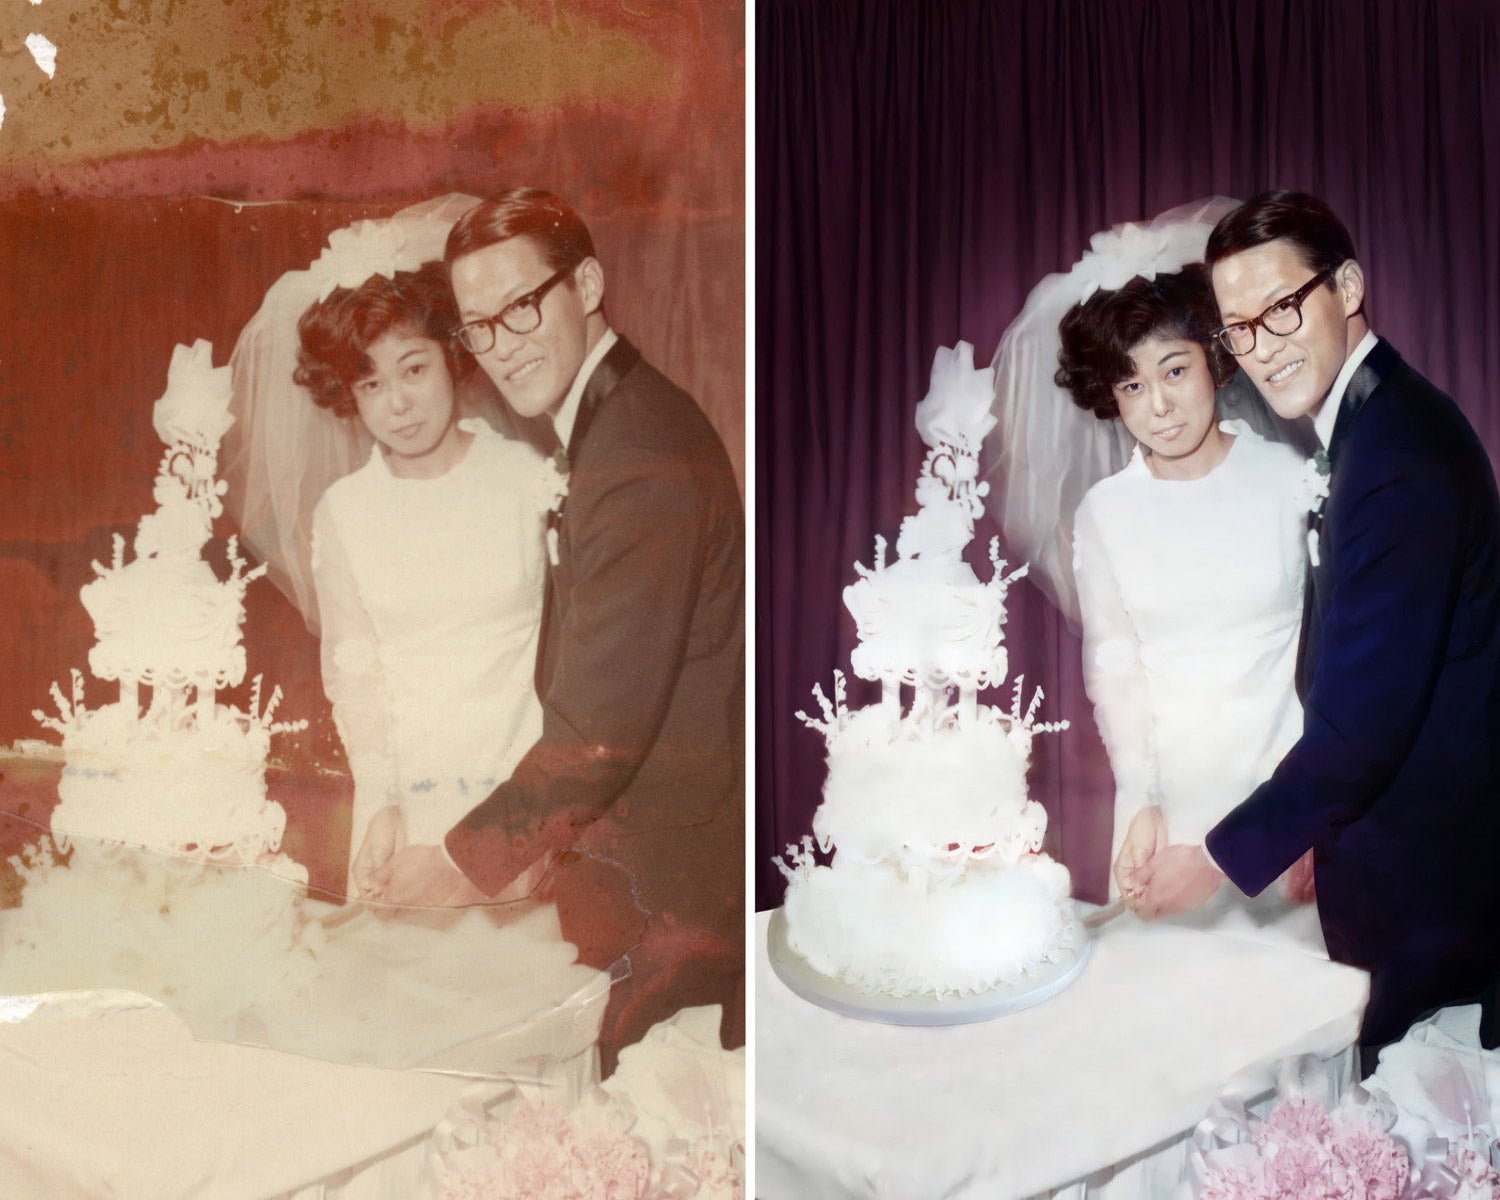 A picture restoration service example of a wedding photo restored from a worn, damaged and faded look